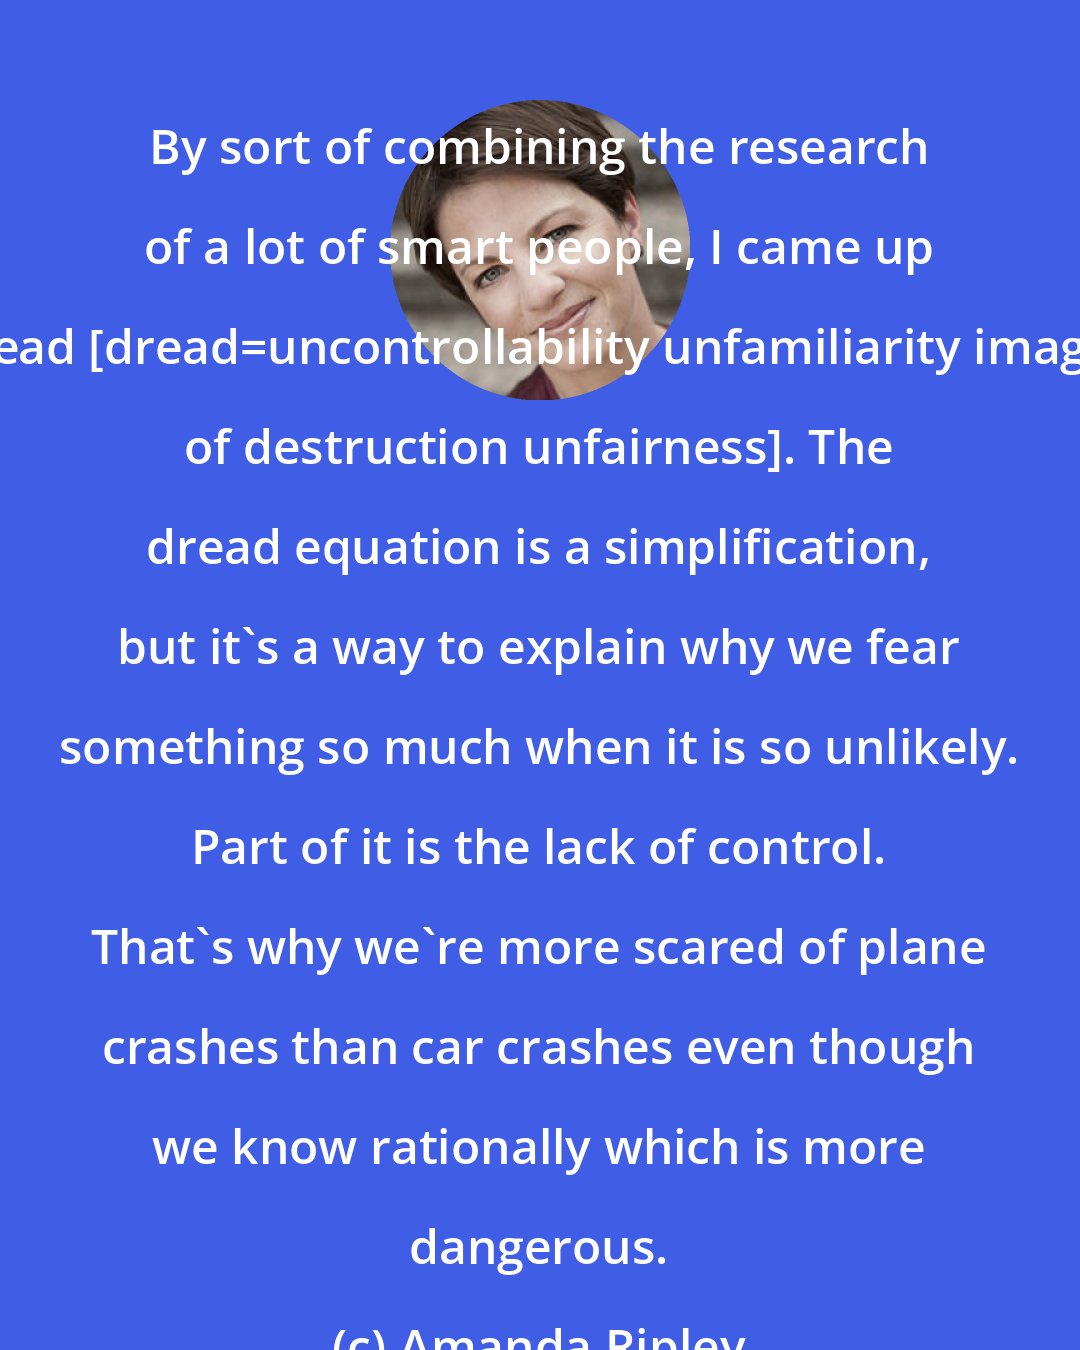 Amanda Ripley: By sort of combining the research of a lot of smart people, I came up with an equation for dread [dread=uncontrollability+unfamiliarity+imaginability+suffering+scale of destruction+unfairness]. The dread equation is a simplification, but it's a way to explain why we fear something so much when it is so unlikely. Part of it is the lack of control. That's why we're more scared of plane crashes than car crashes even though we know rationally which is more dangerous.